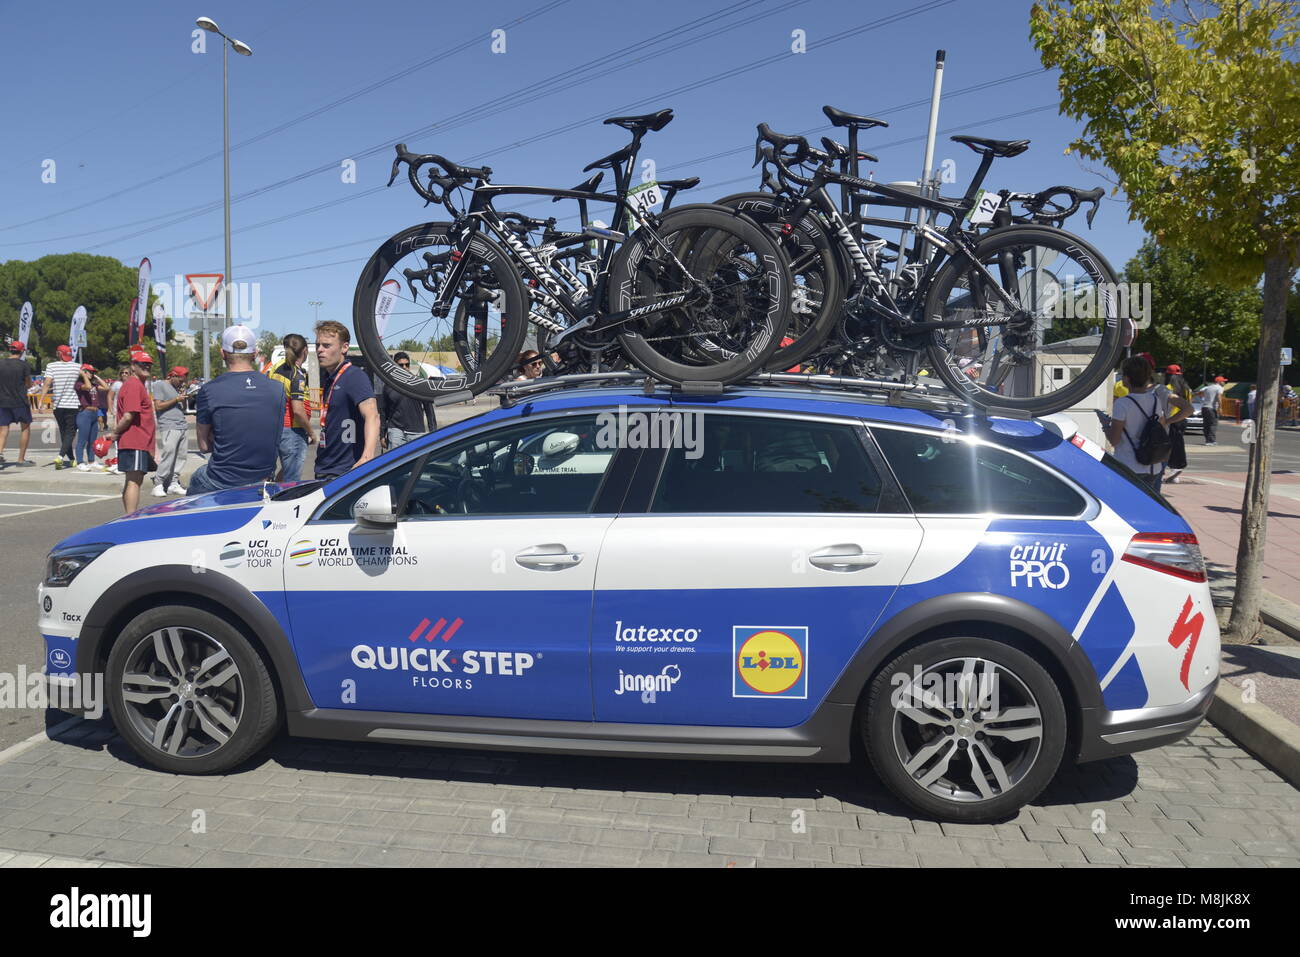 Quick Step cycling sports team support car used in la Vuelta holding spare road bicycles before stage departure in La Vuelta a España in Madrid, Spain Stock Photo